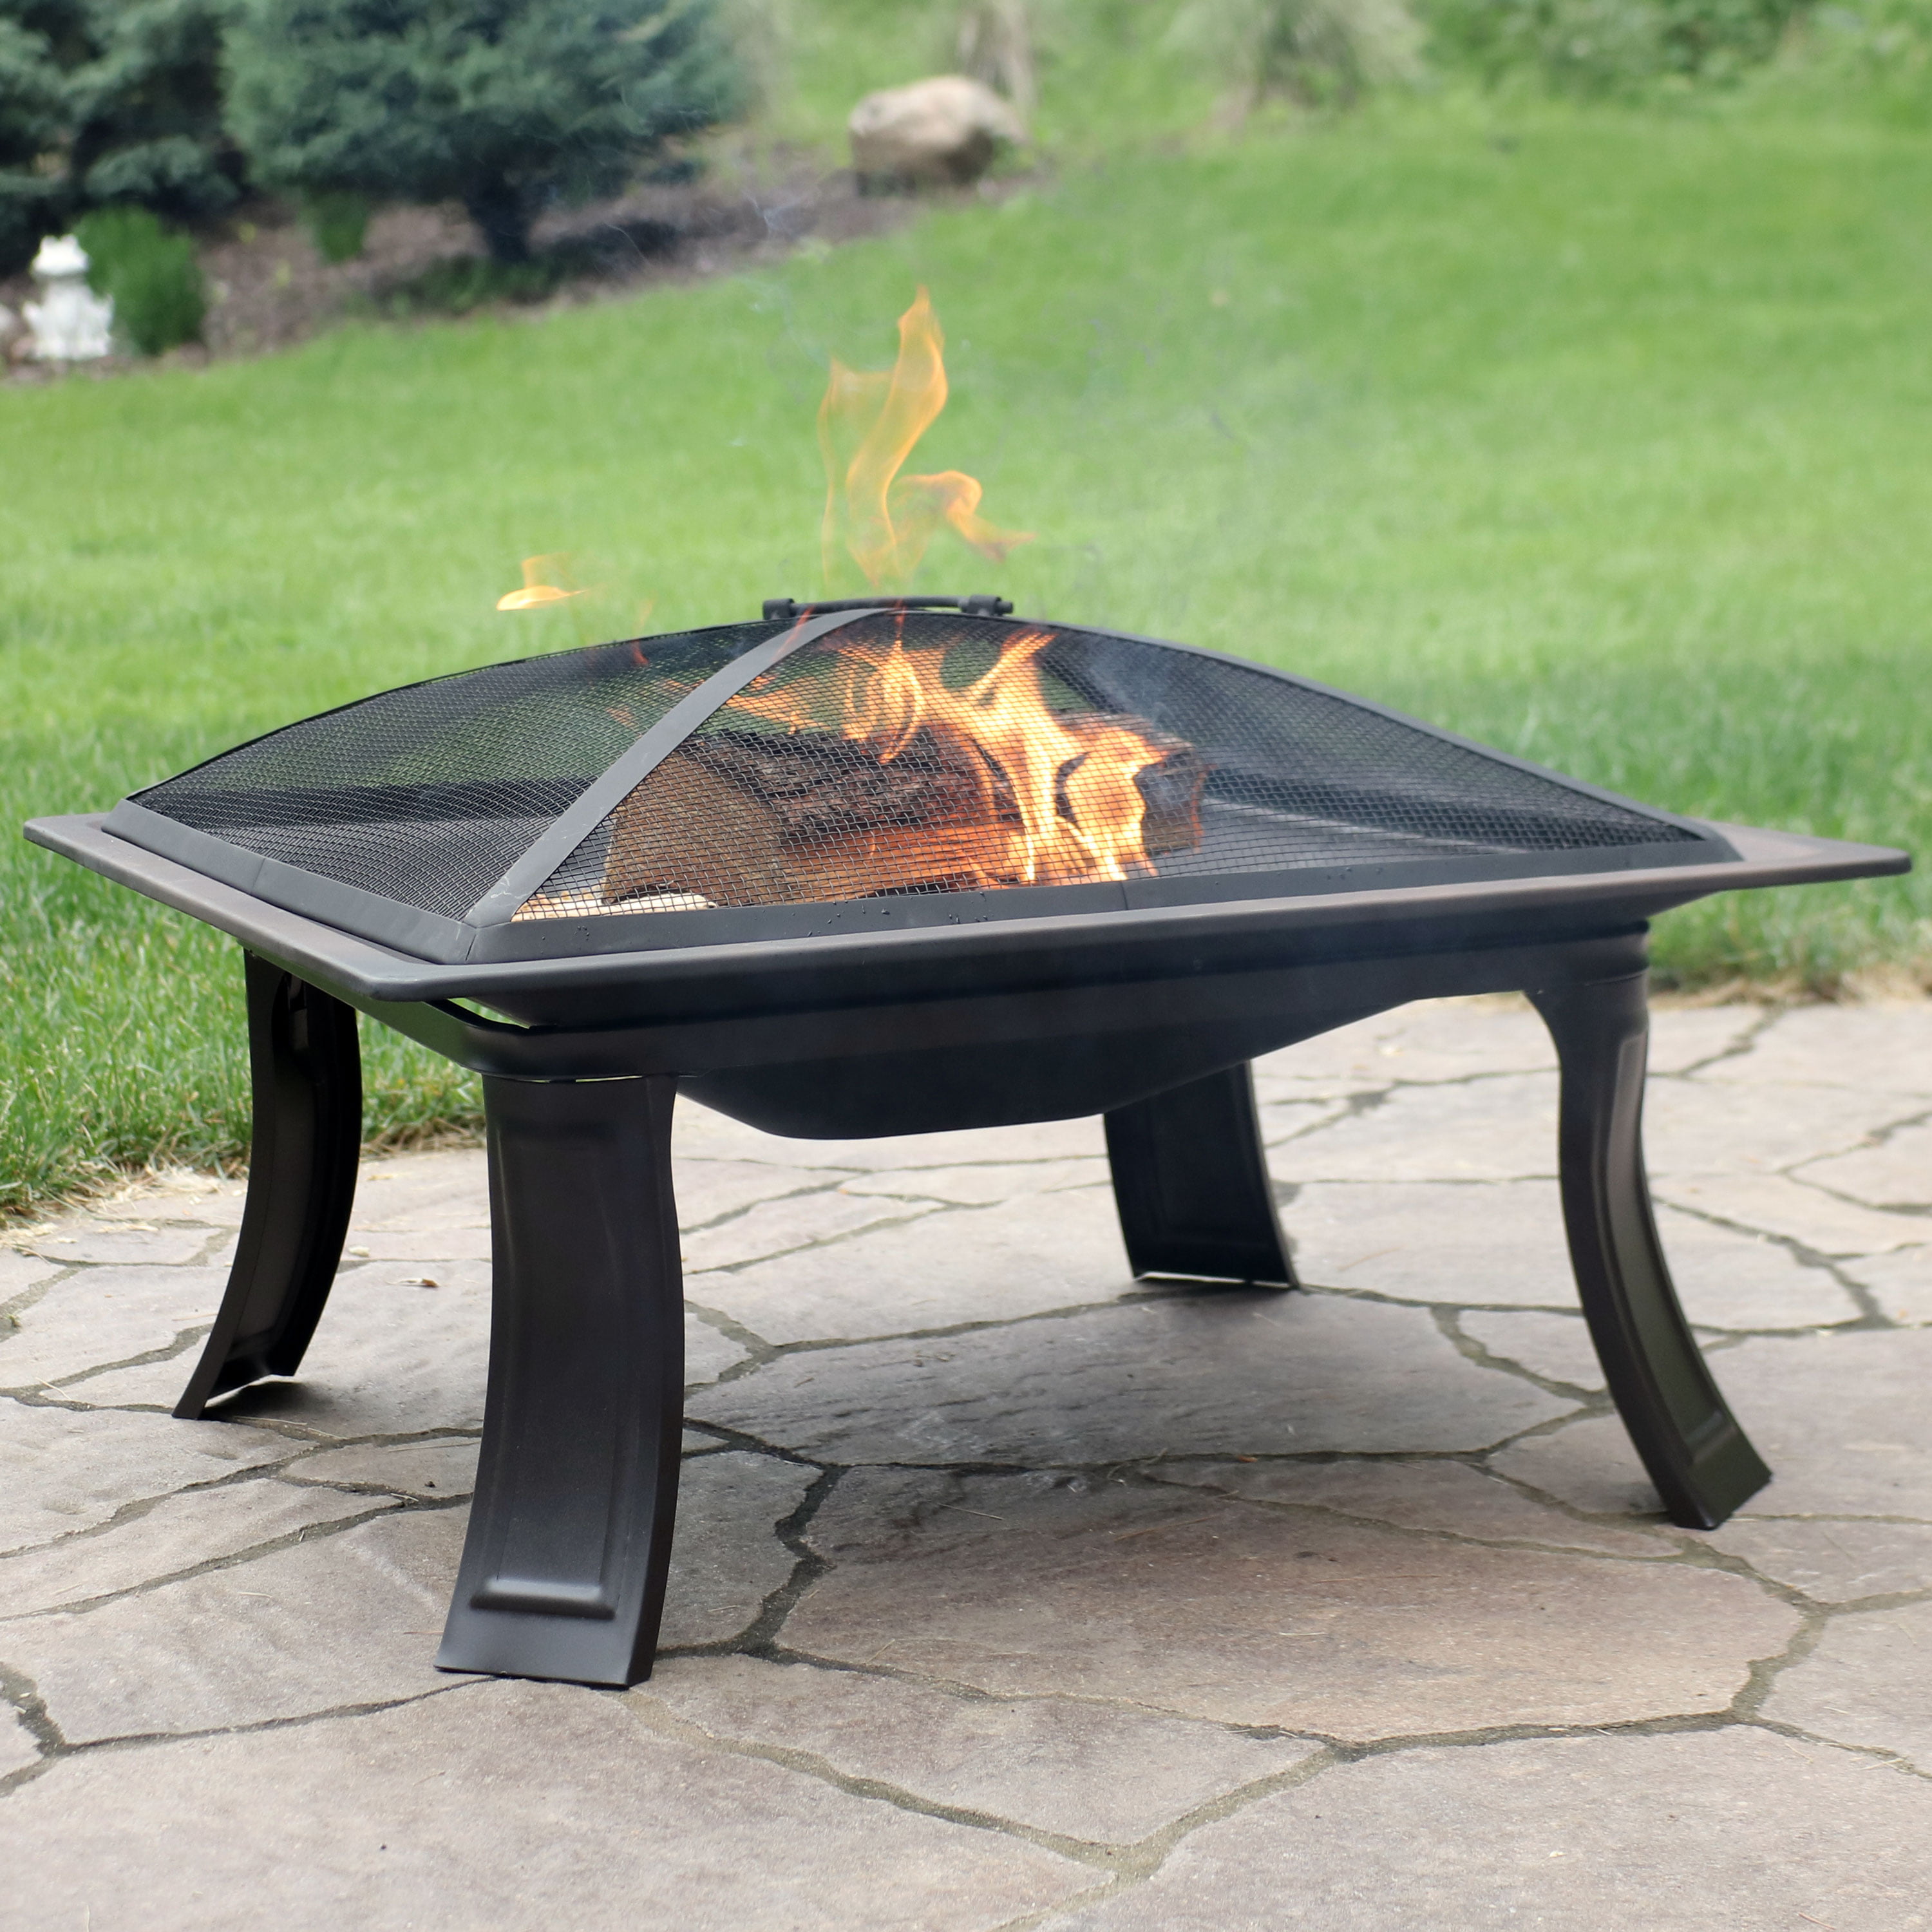 Sunnydaze Wood Burning Fire Pit, Portable Fire Pit Camping